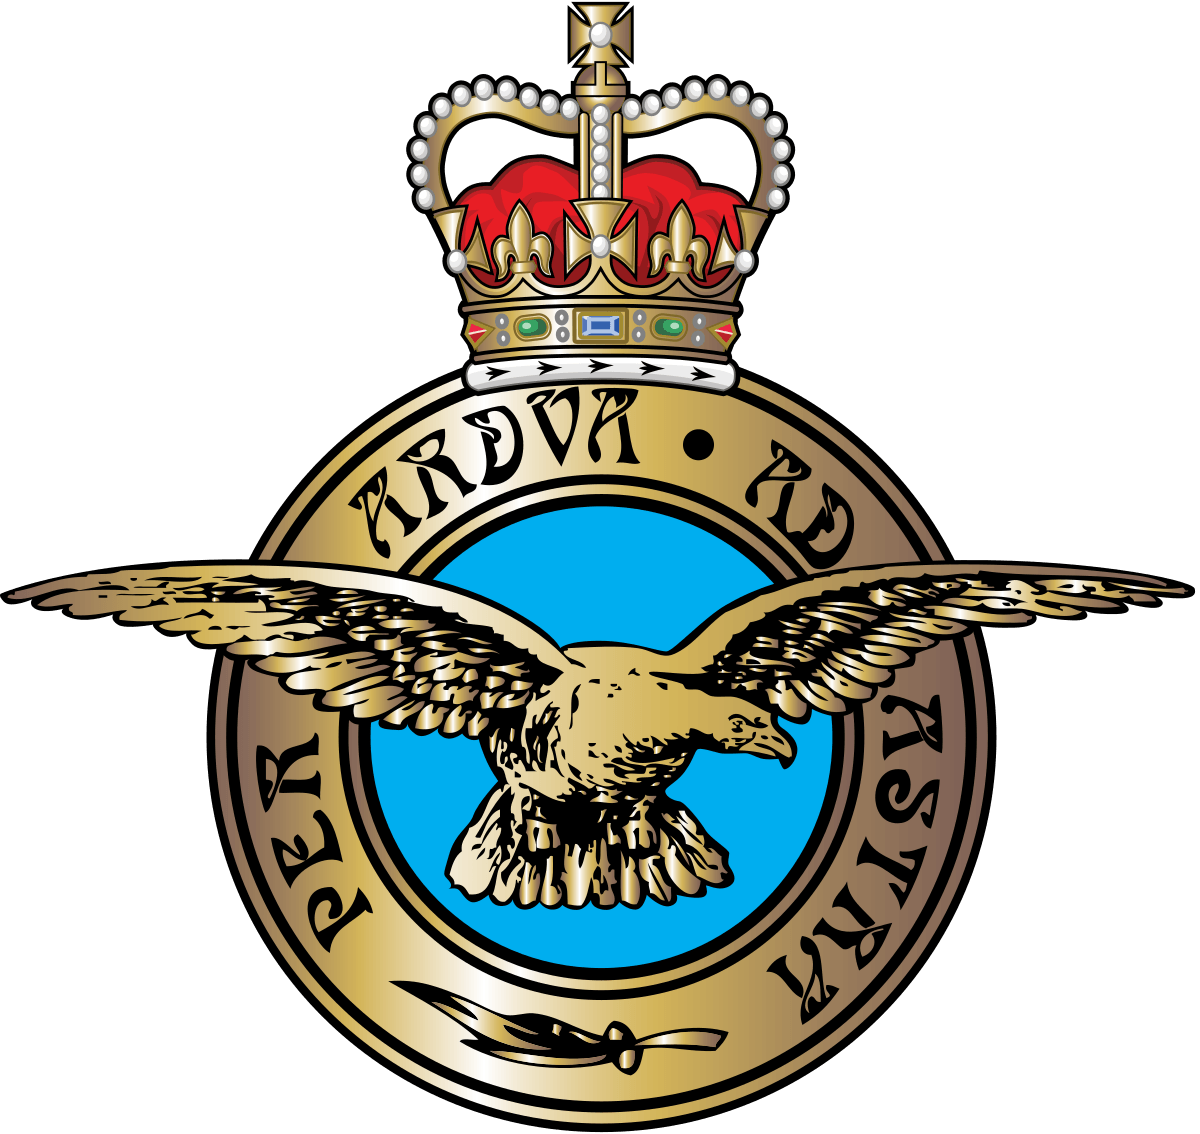 Air Force Plane with Logo - Royal Air Force